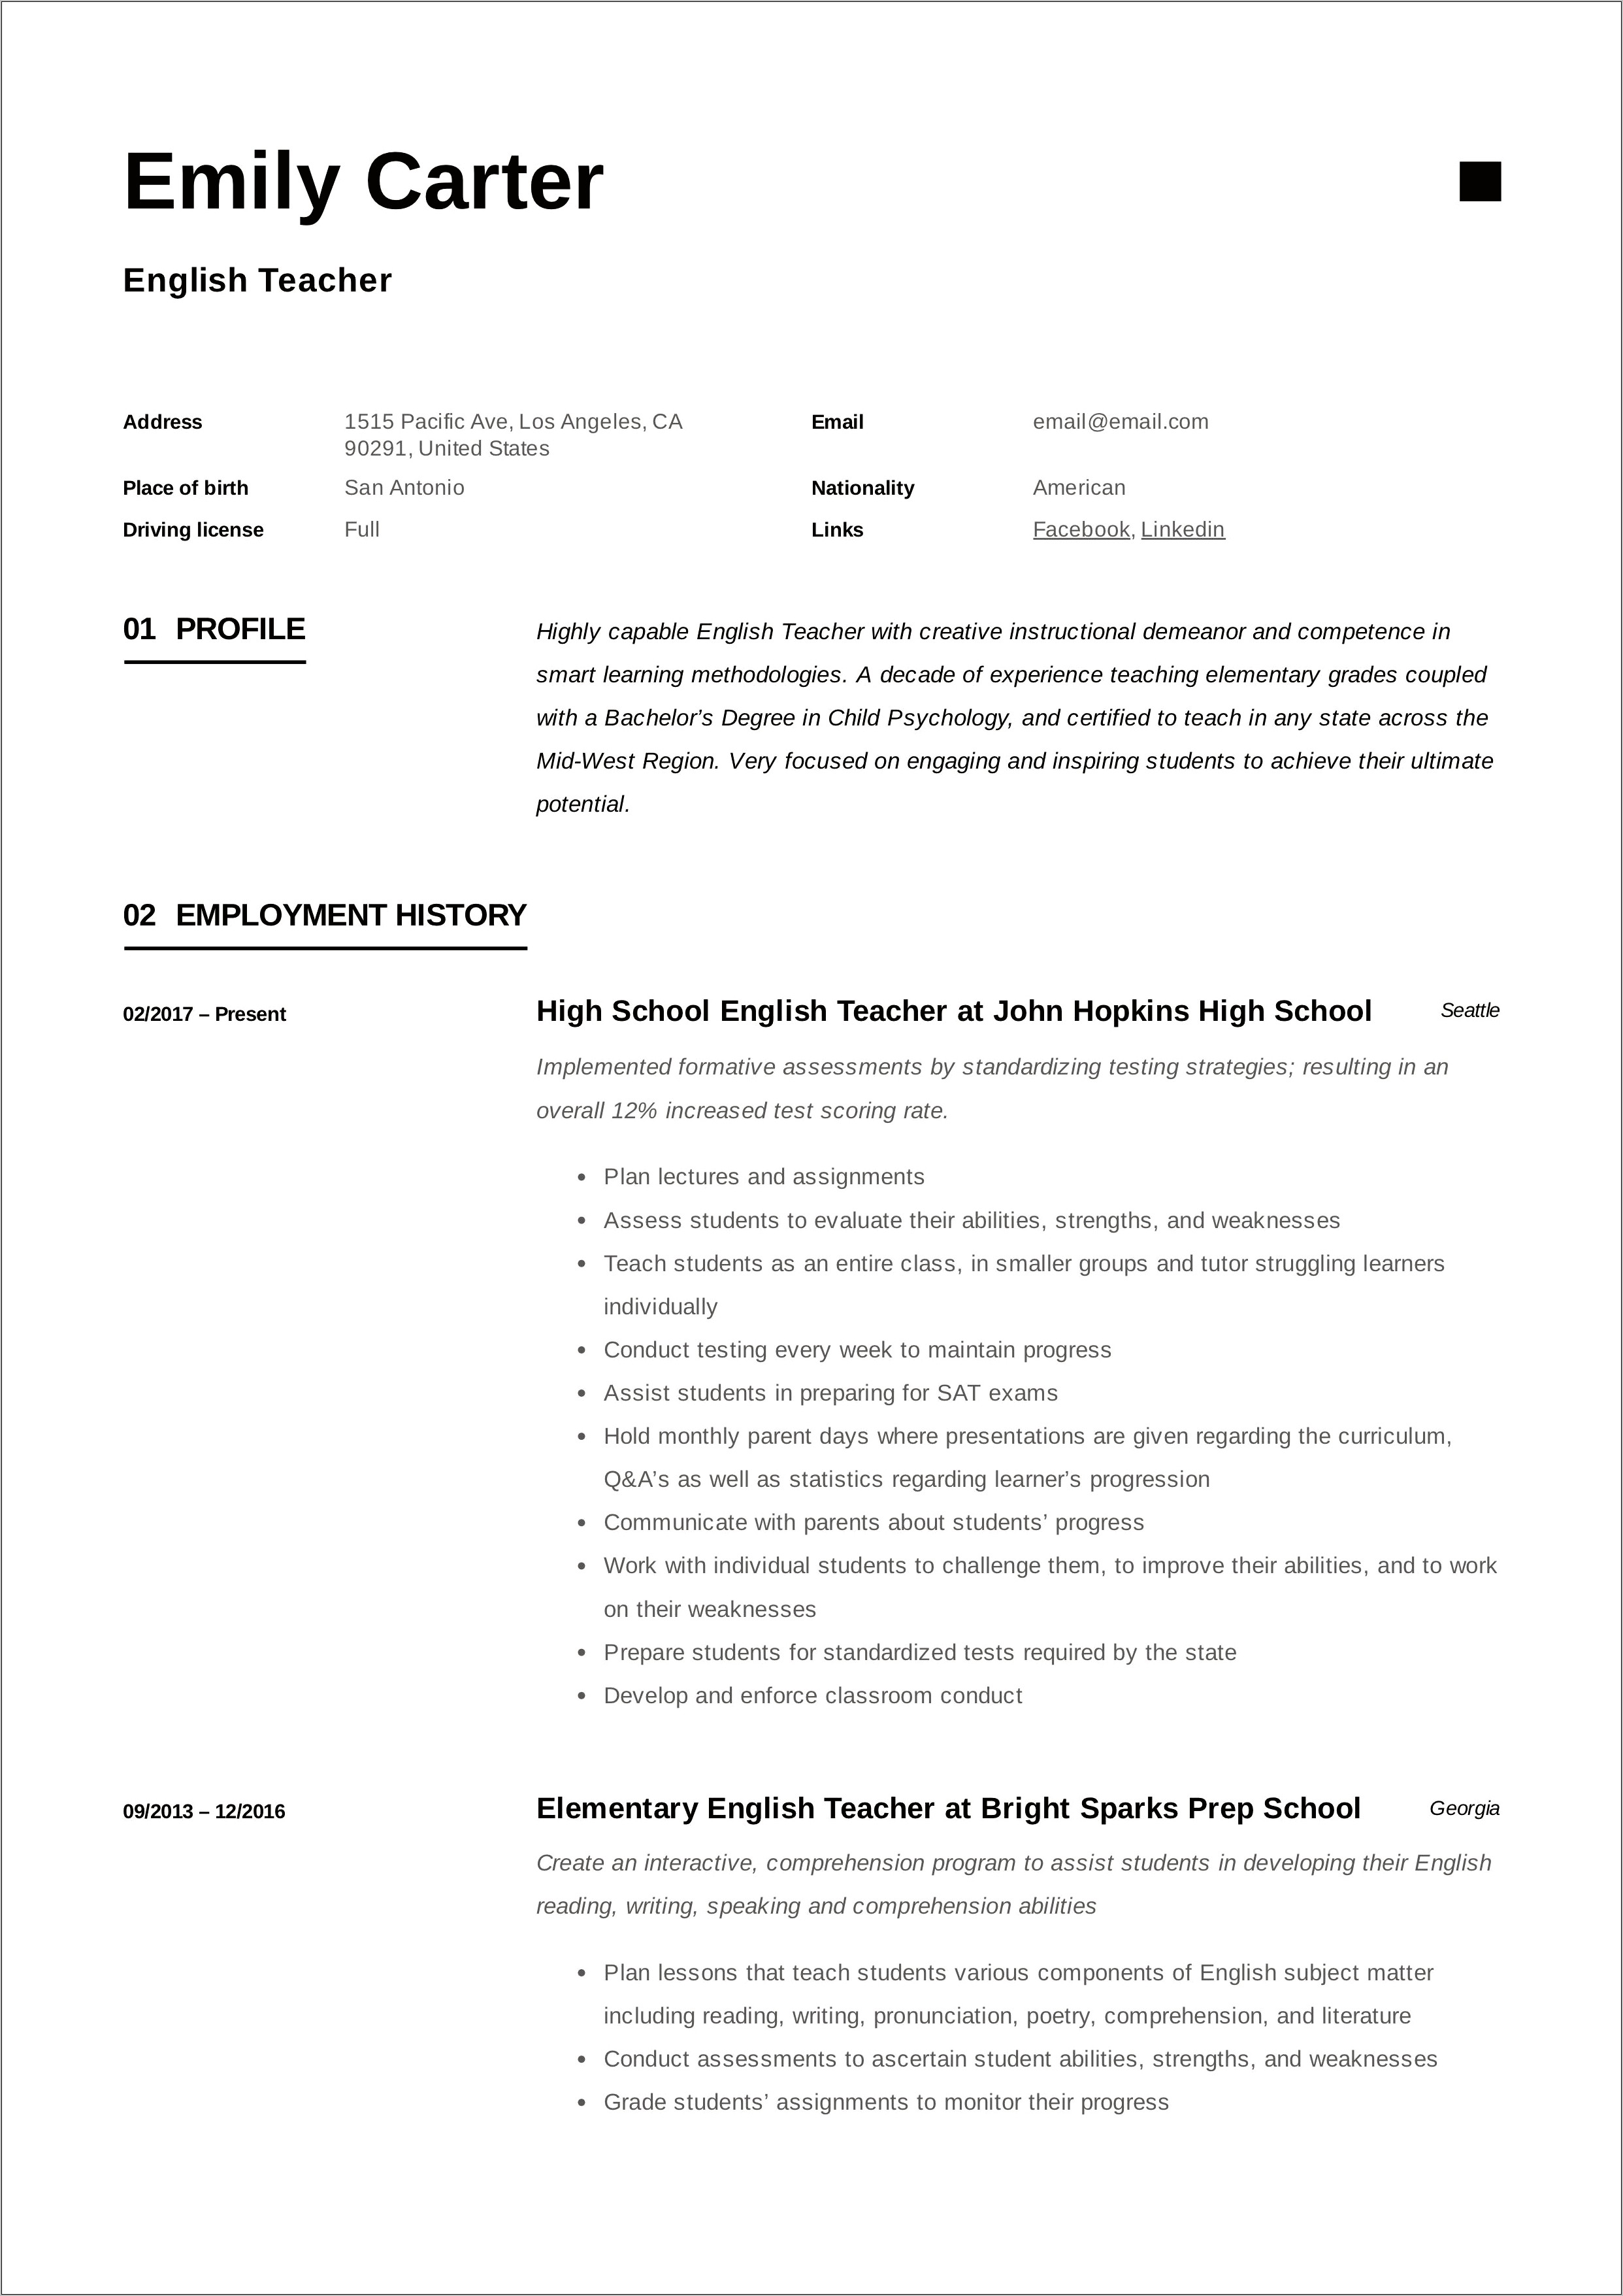 Skills And Stregnths On Resume Of A Teacher